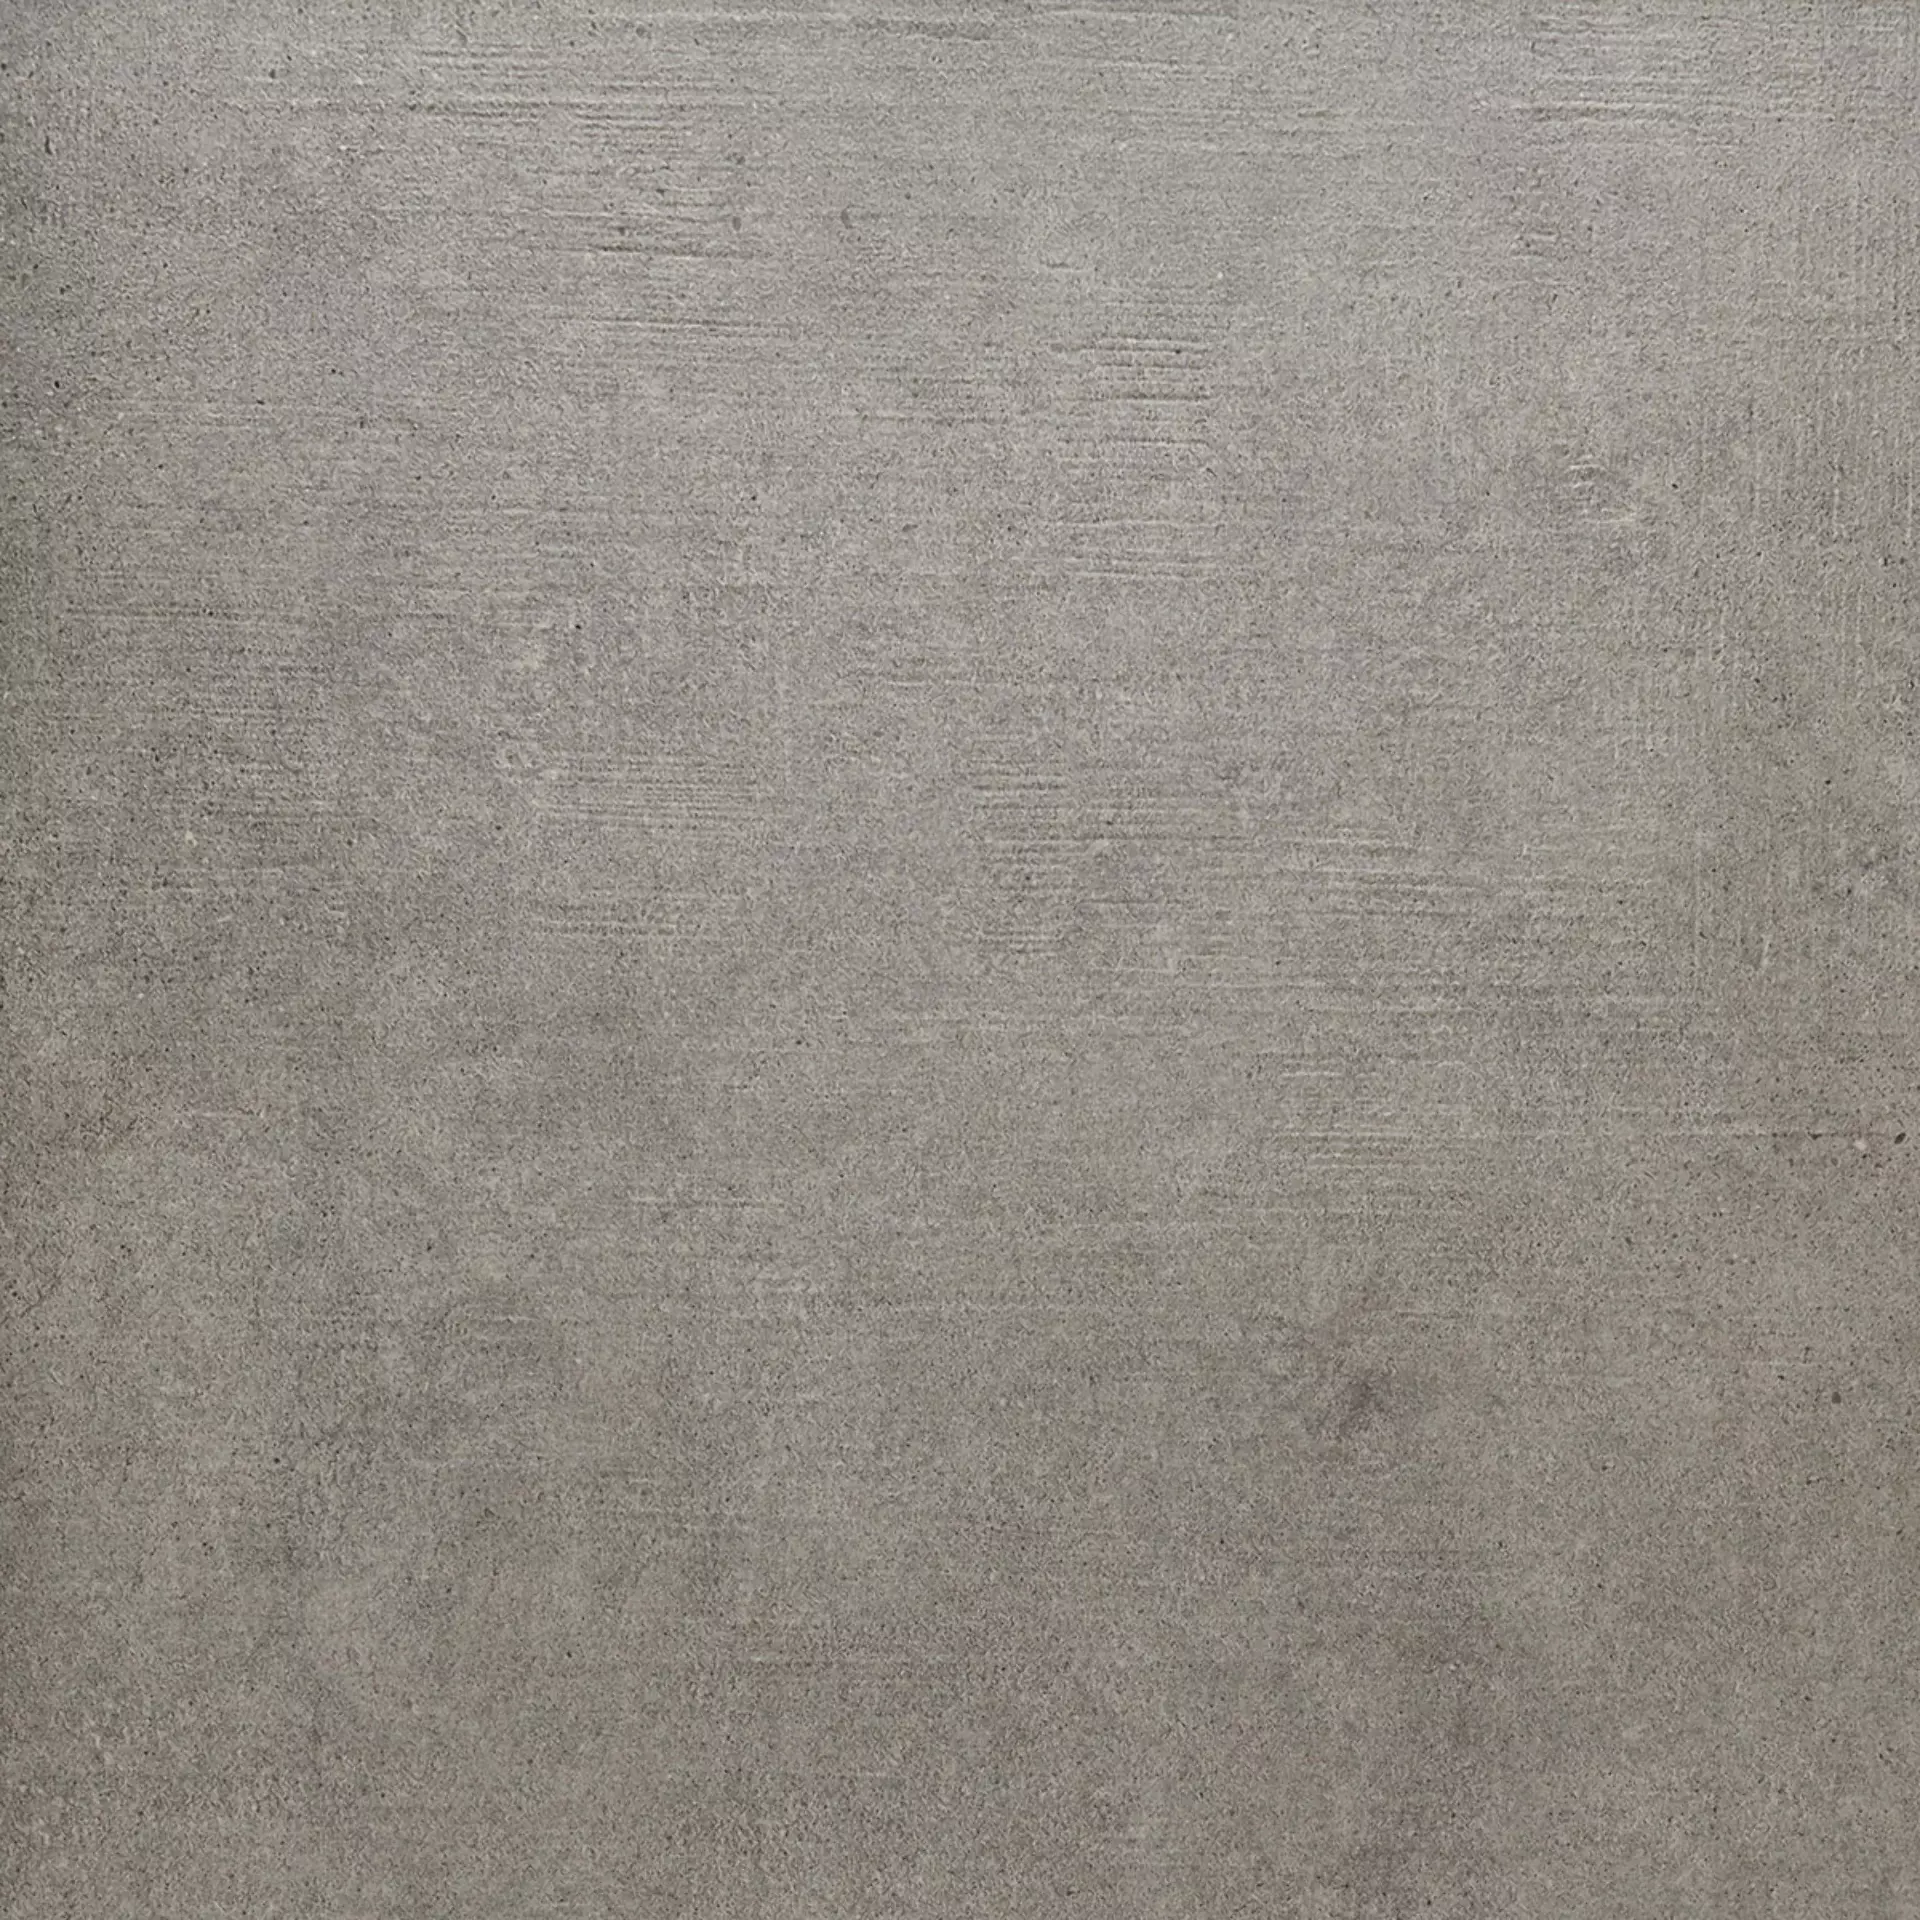 Rondine Loft Taupe Strong J89111 80x80cm rectified 8,5mm